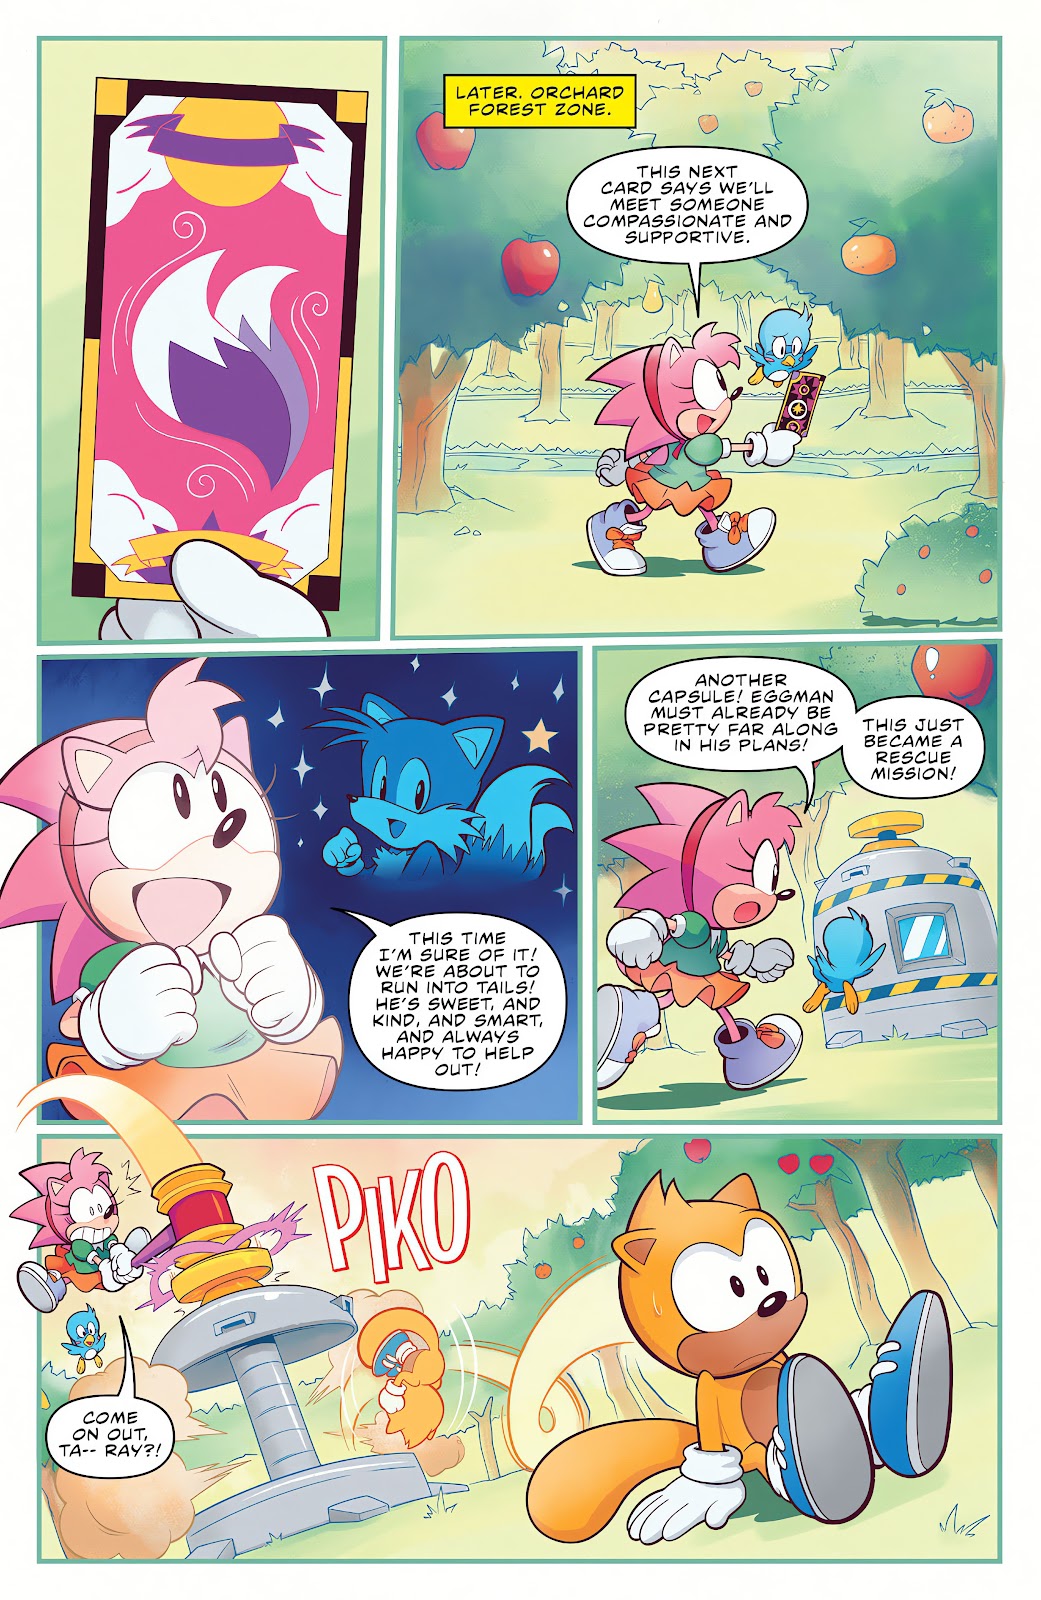 cohost! - Sonic the Hedgehog: Amy's 30th Anniversary Special Preview Pages